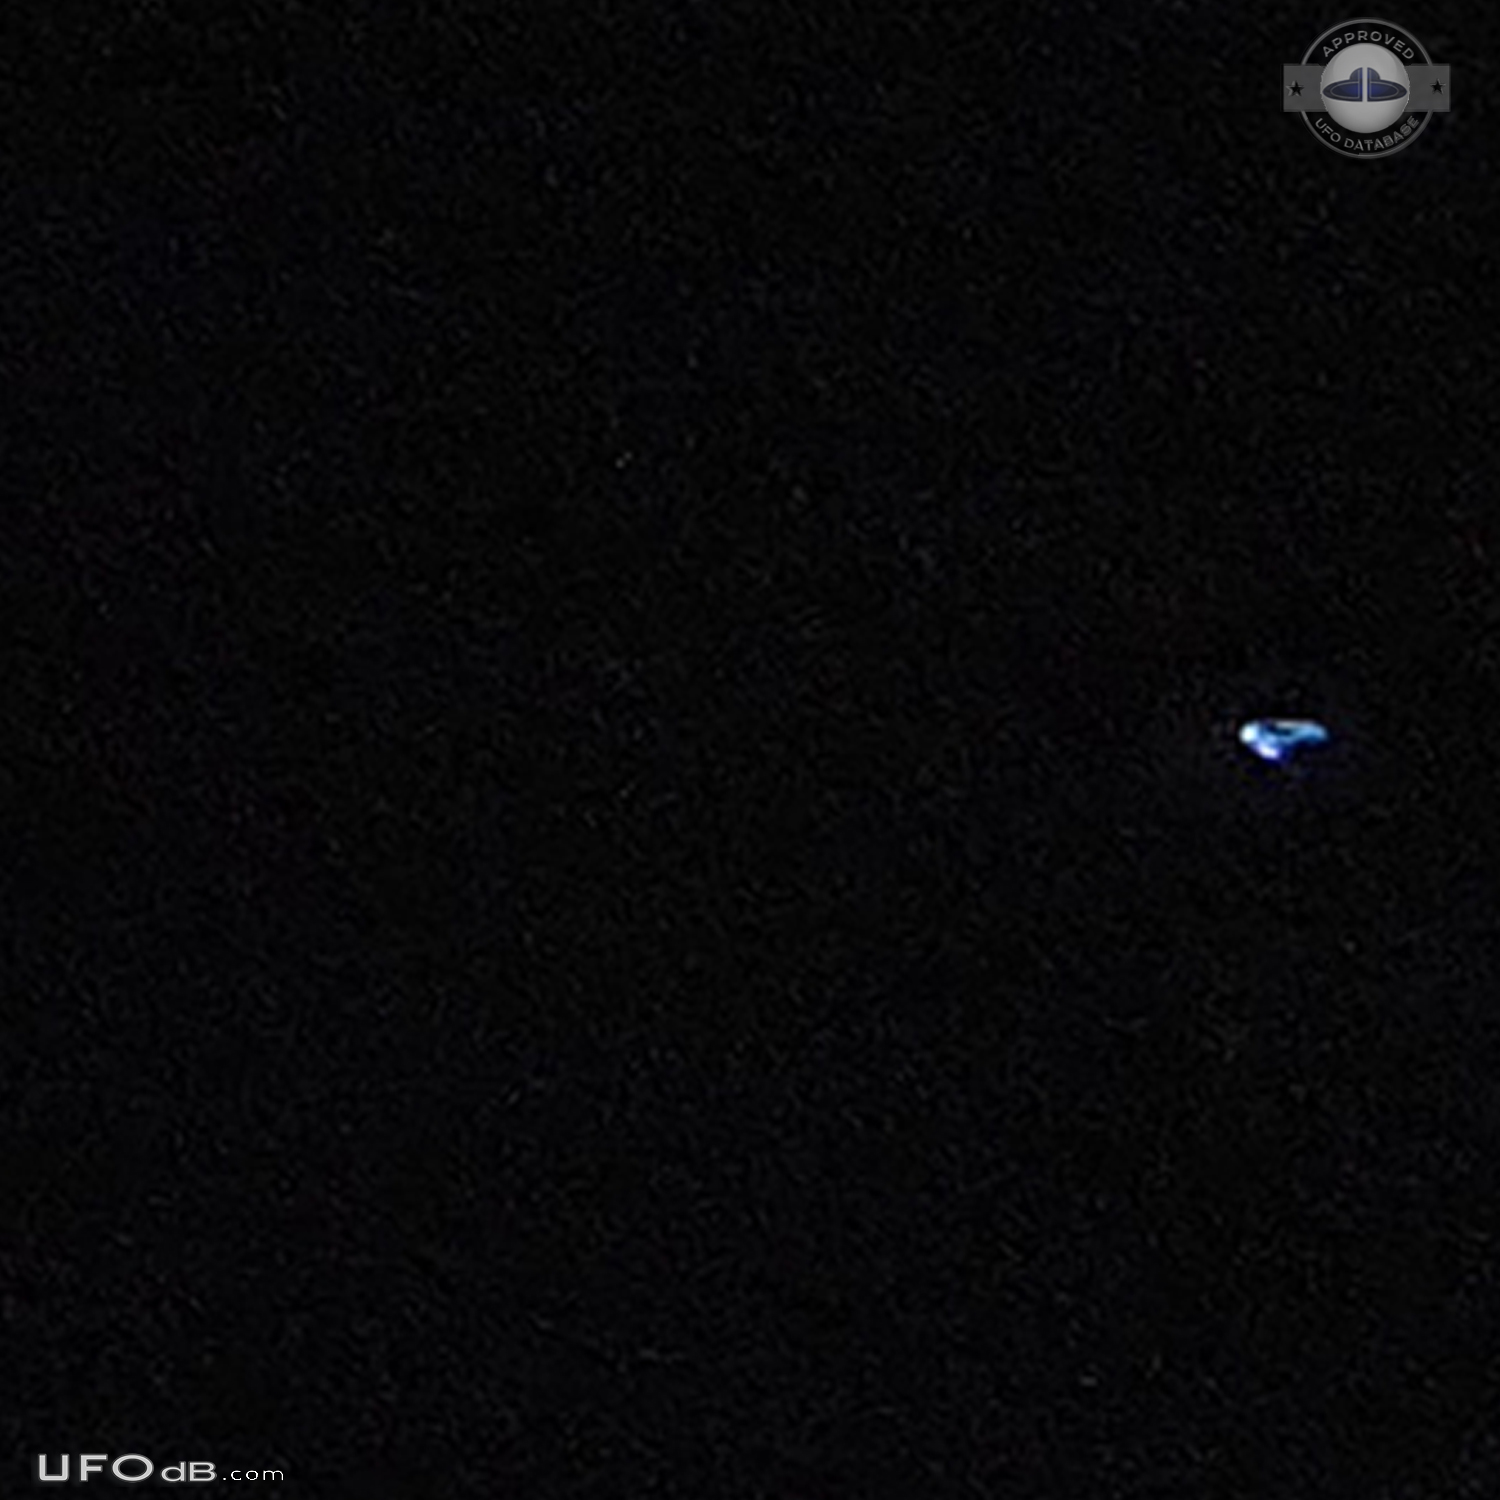 During meditation he discovered UFO appearing on the shot - Singapore  UFO Picture #794-3